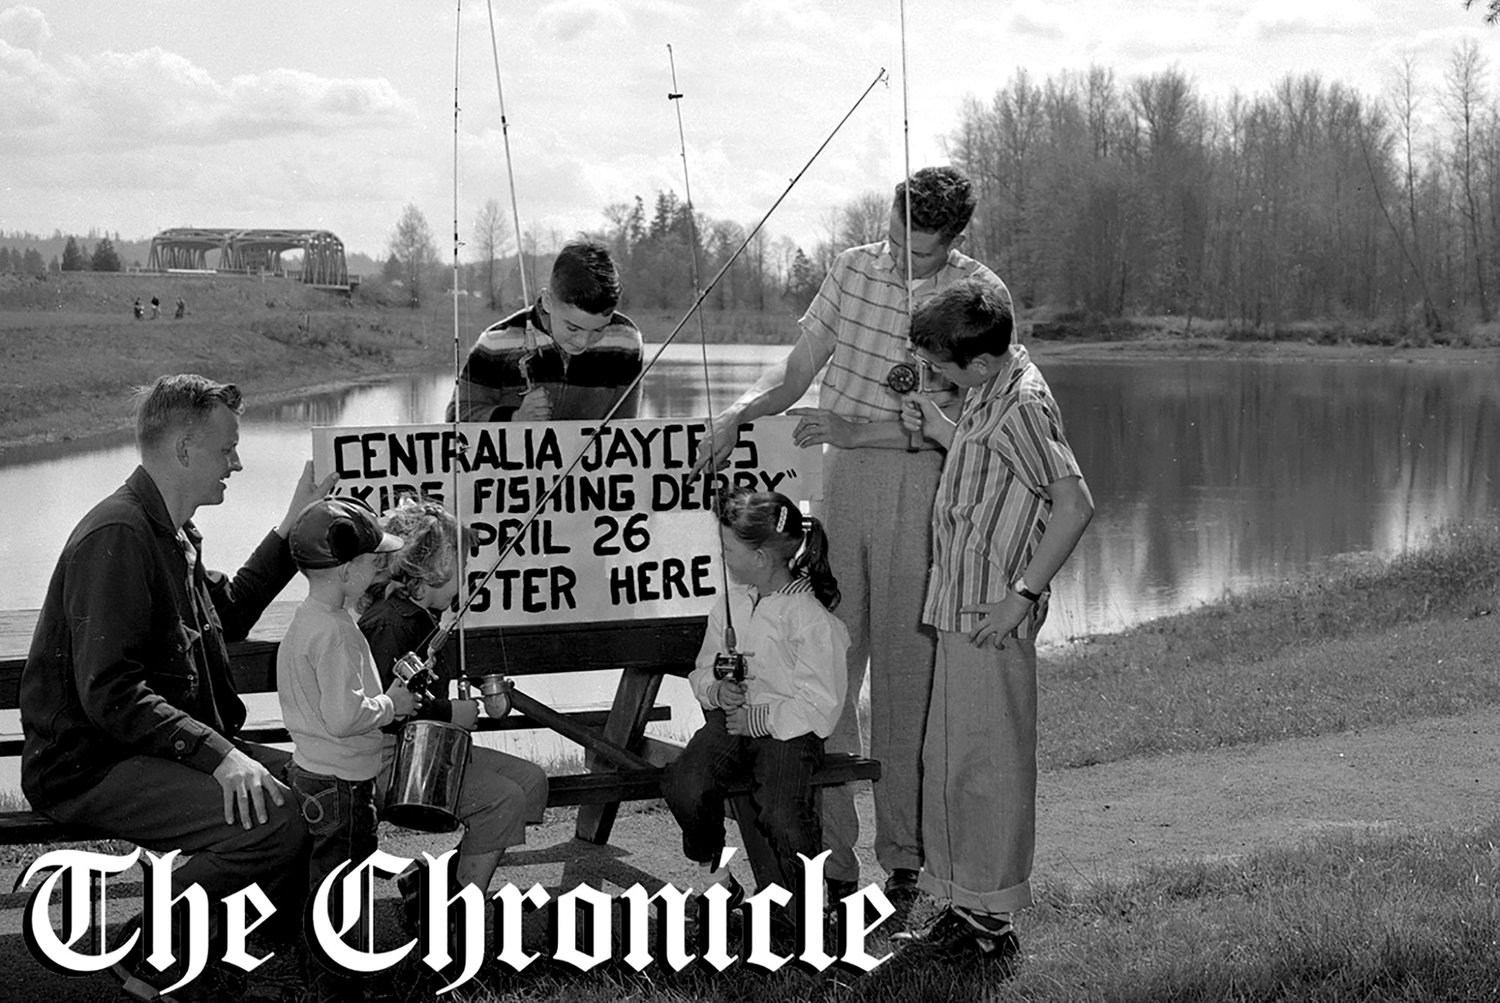 From the April 1958 Chronicle archives: “GETTING READY for the opening of the derby, a group of youngsters gather around Centralia Junior Chamber of Commerce members as they make preparations. The big derby will provide numerous prizes for the youths in Centralia. All parents are asked to sign an application blank and turn them over to the Jaycees. - Chronicle Staff Photo.”